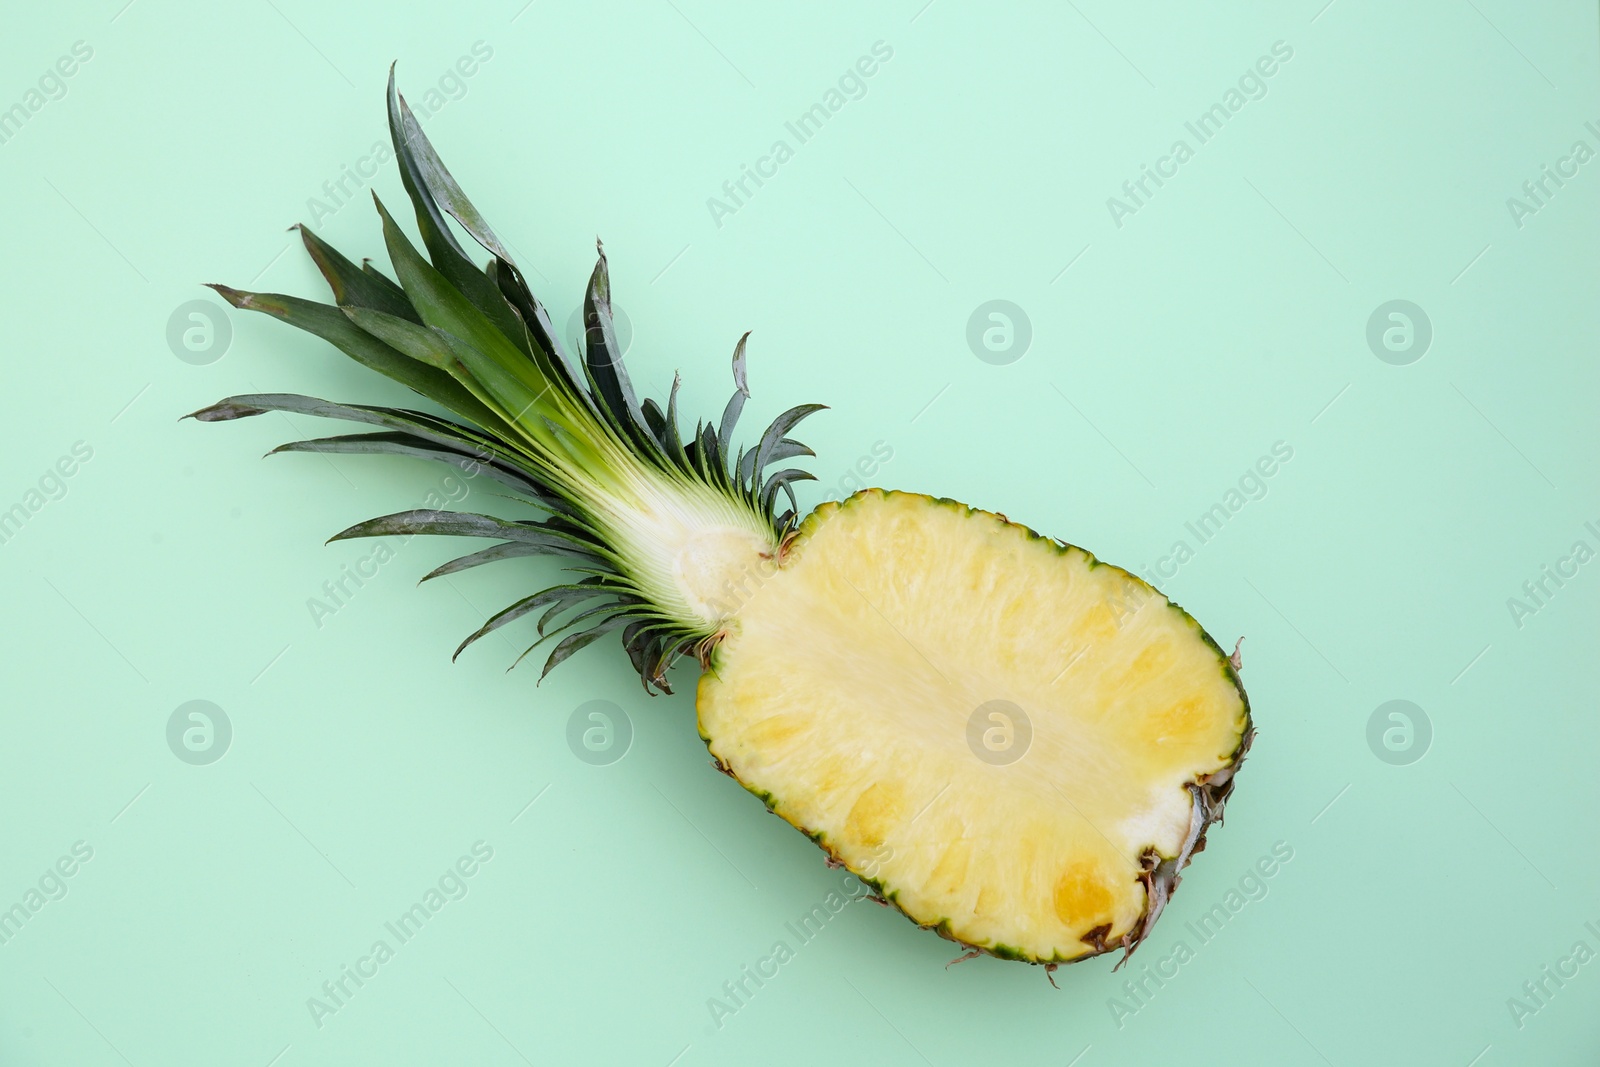 Photo of Half of ripe pineapple on light green background, top view